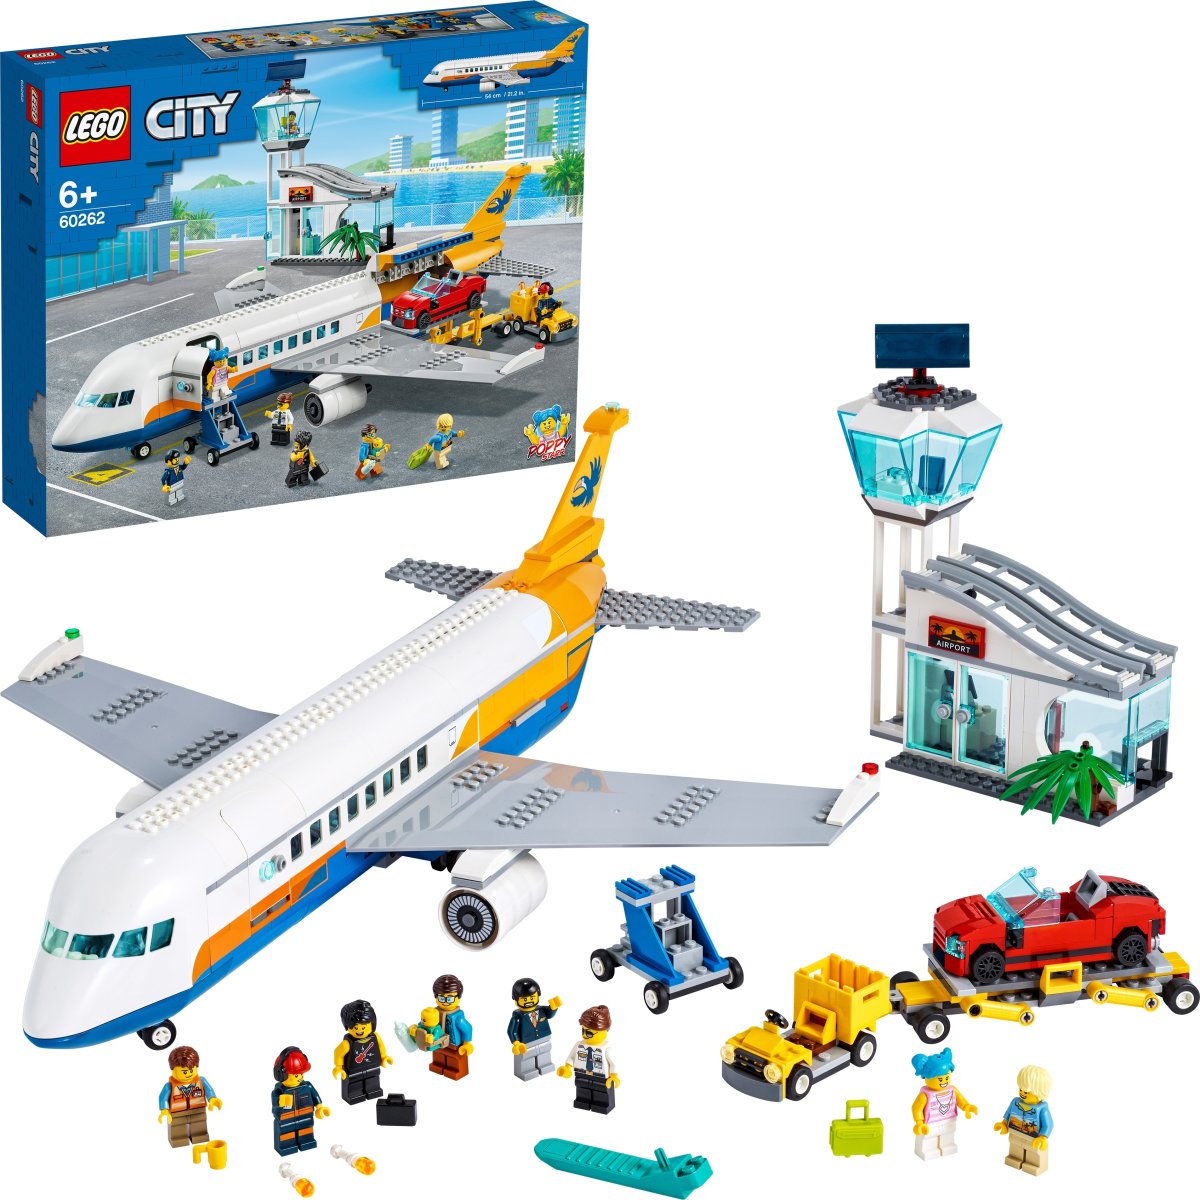 LEGO City Airport 60262 Passagerfly, 6+